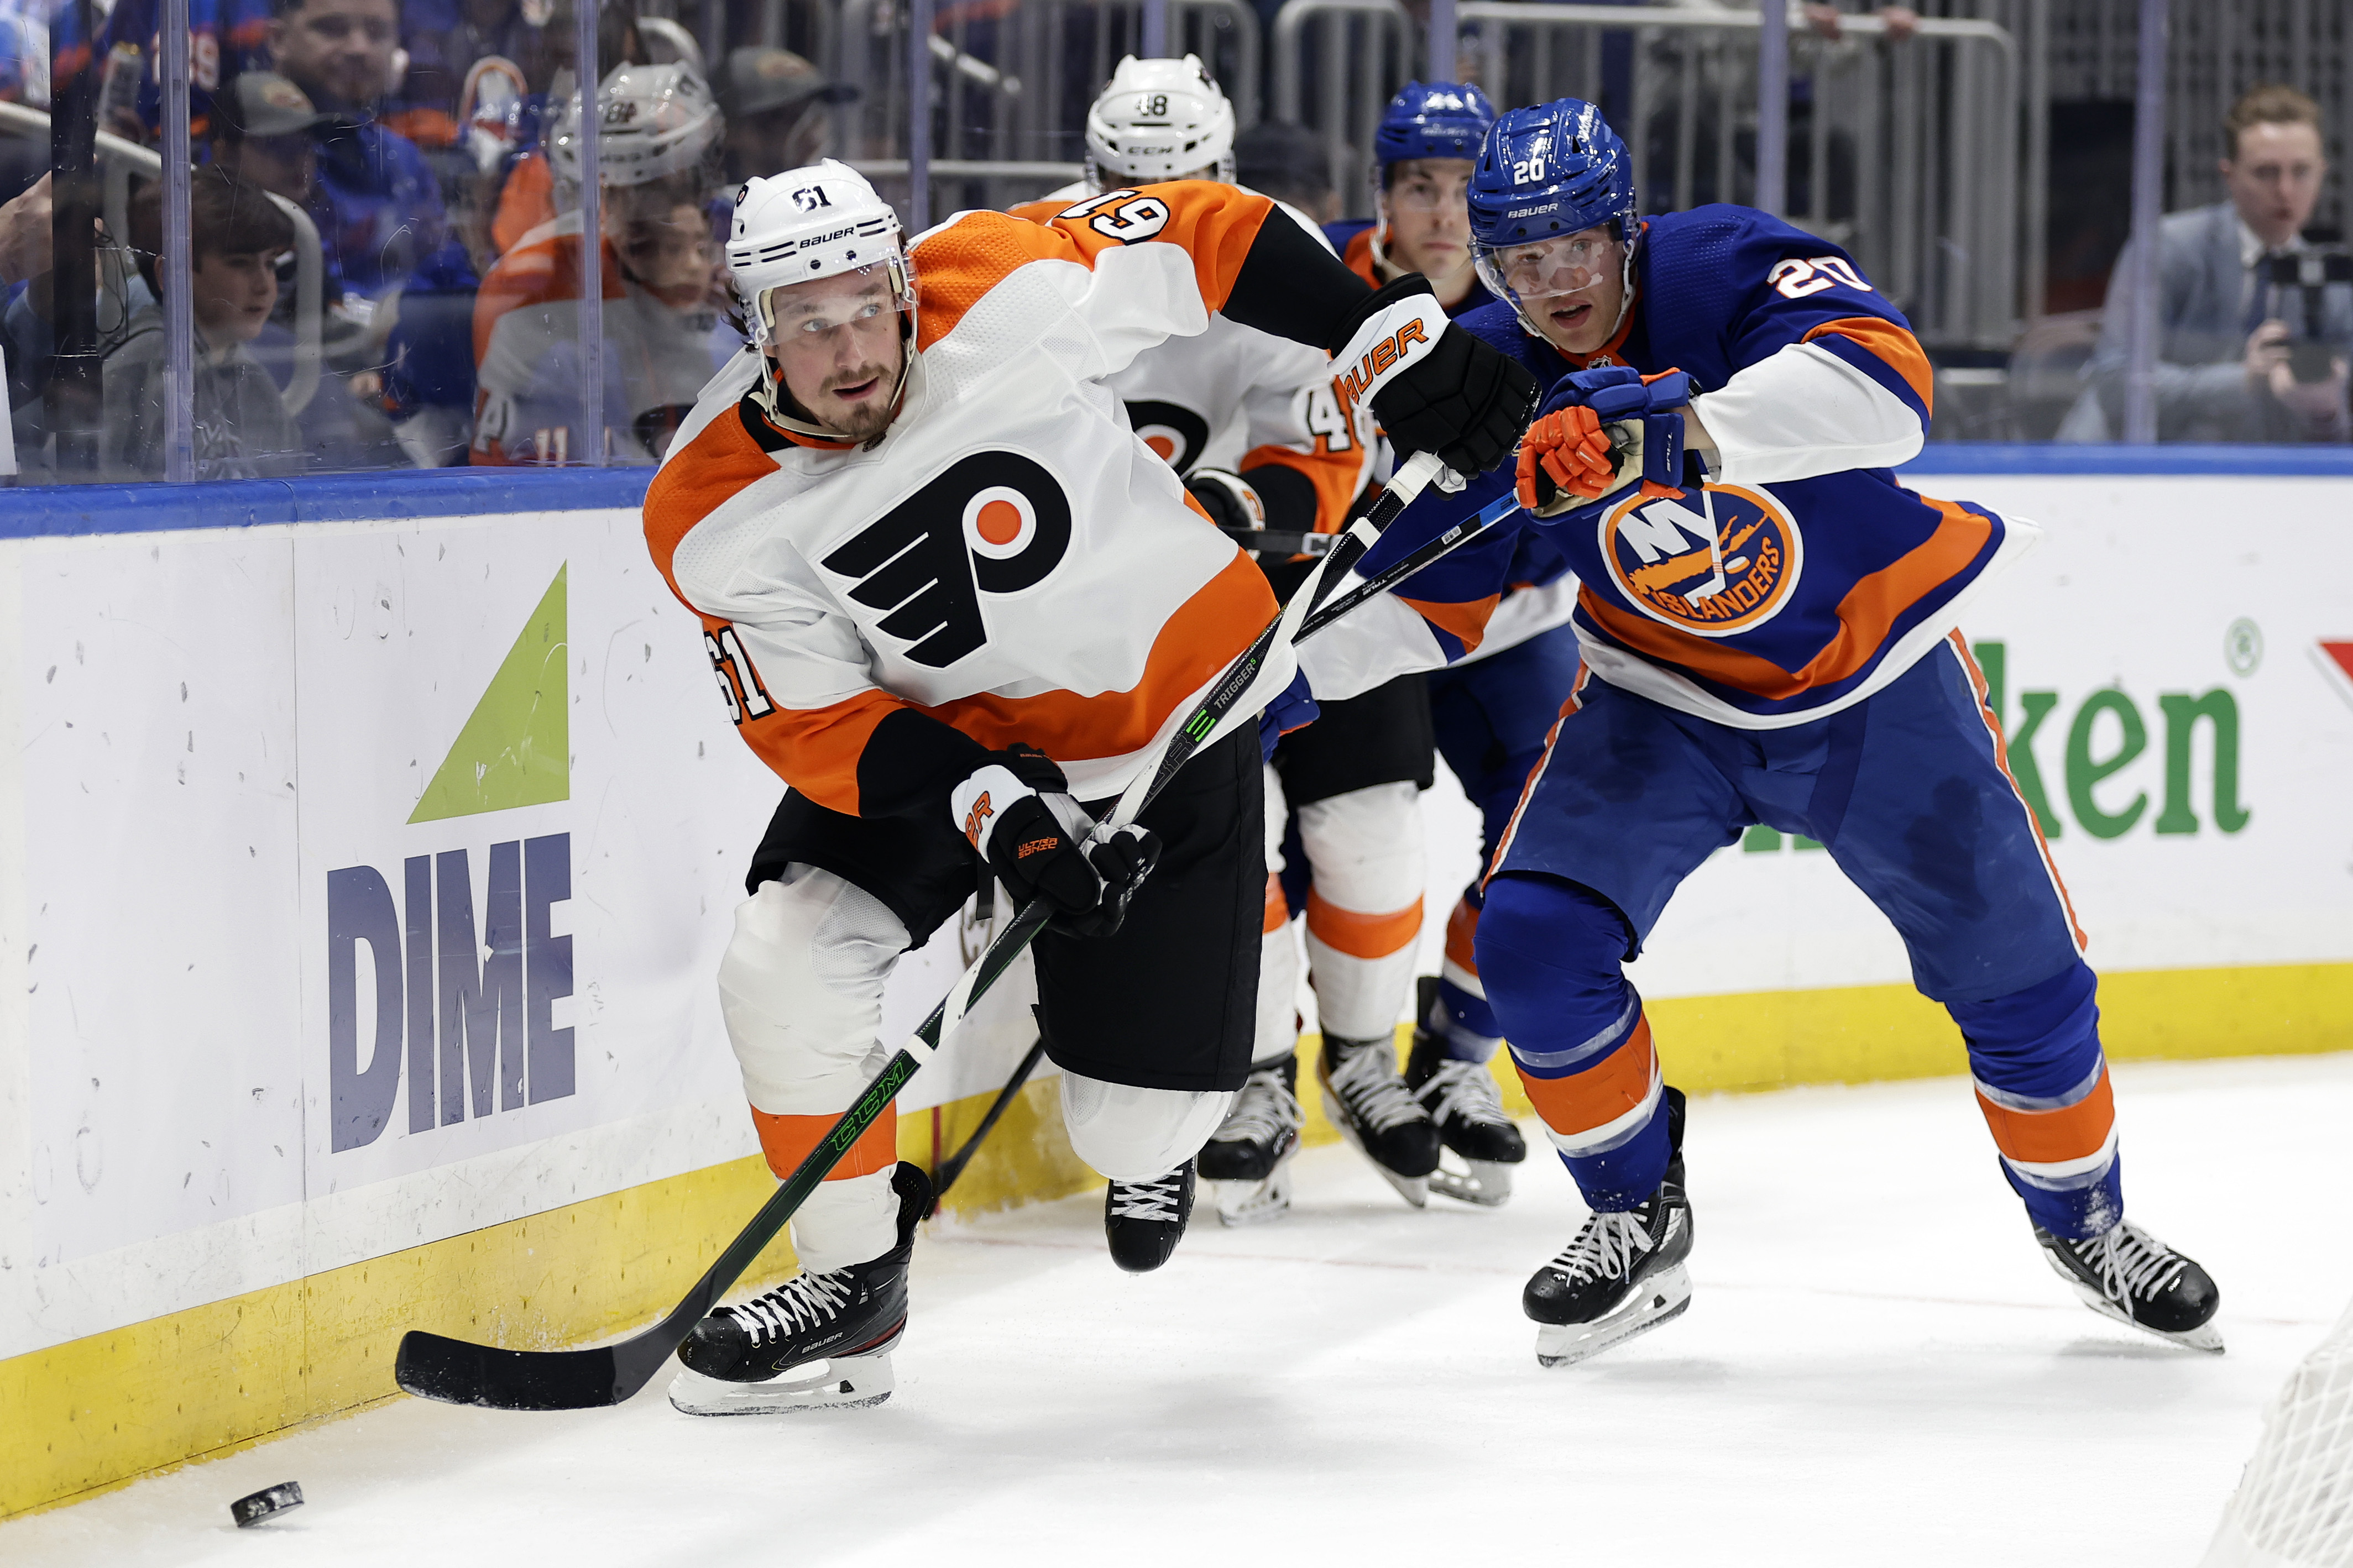 UBS Arena, NHL Islanders home, reshapes New York entertainment